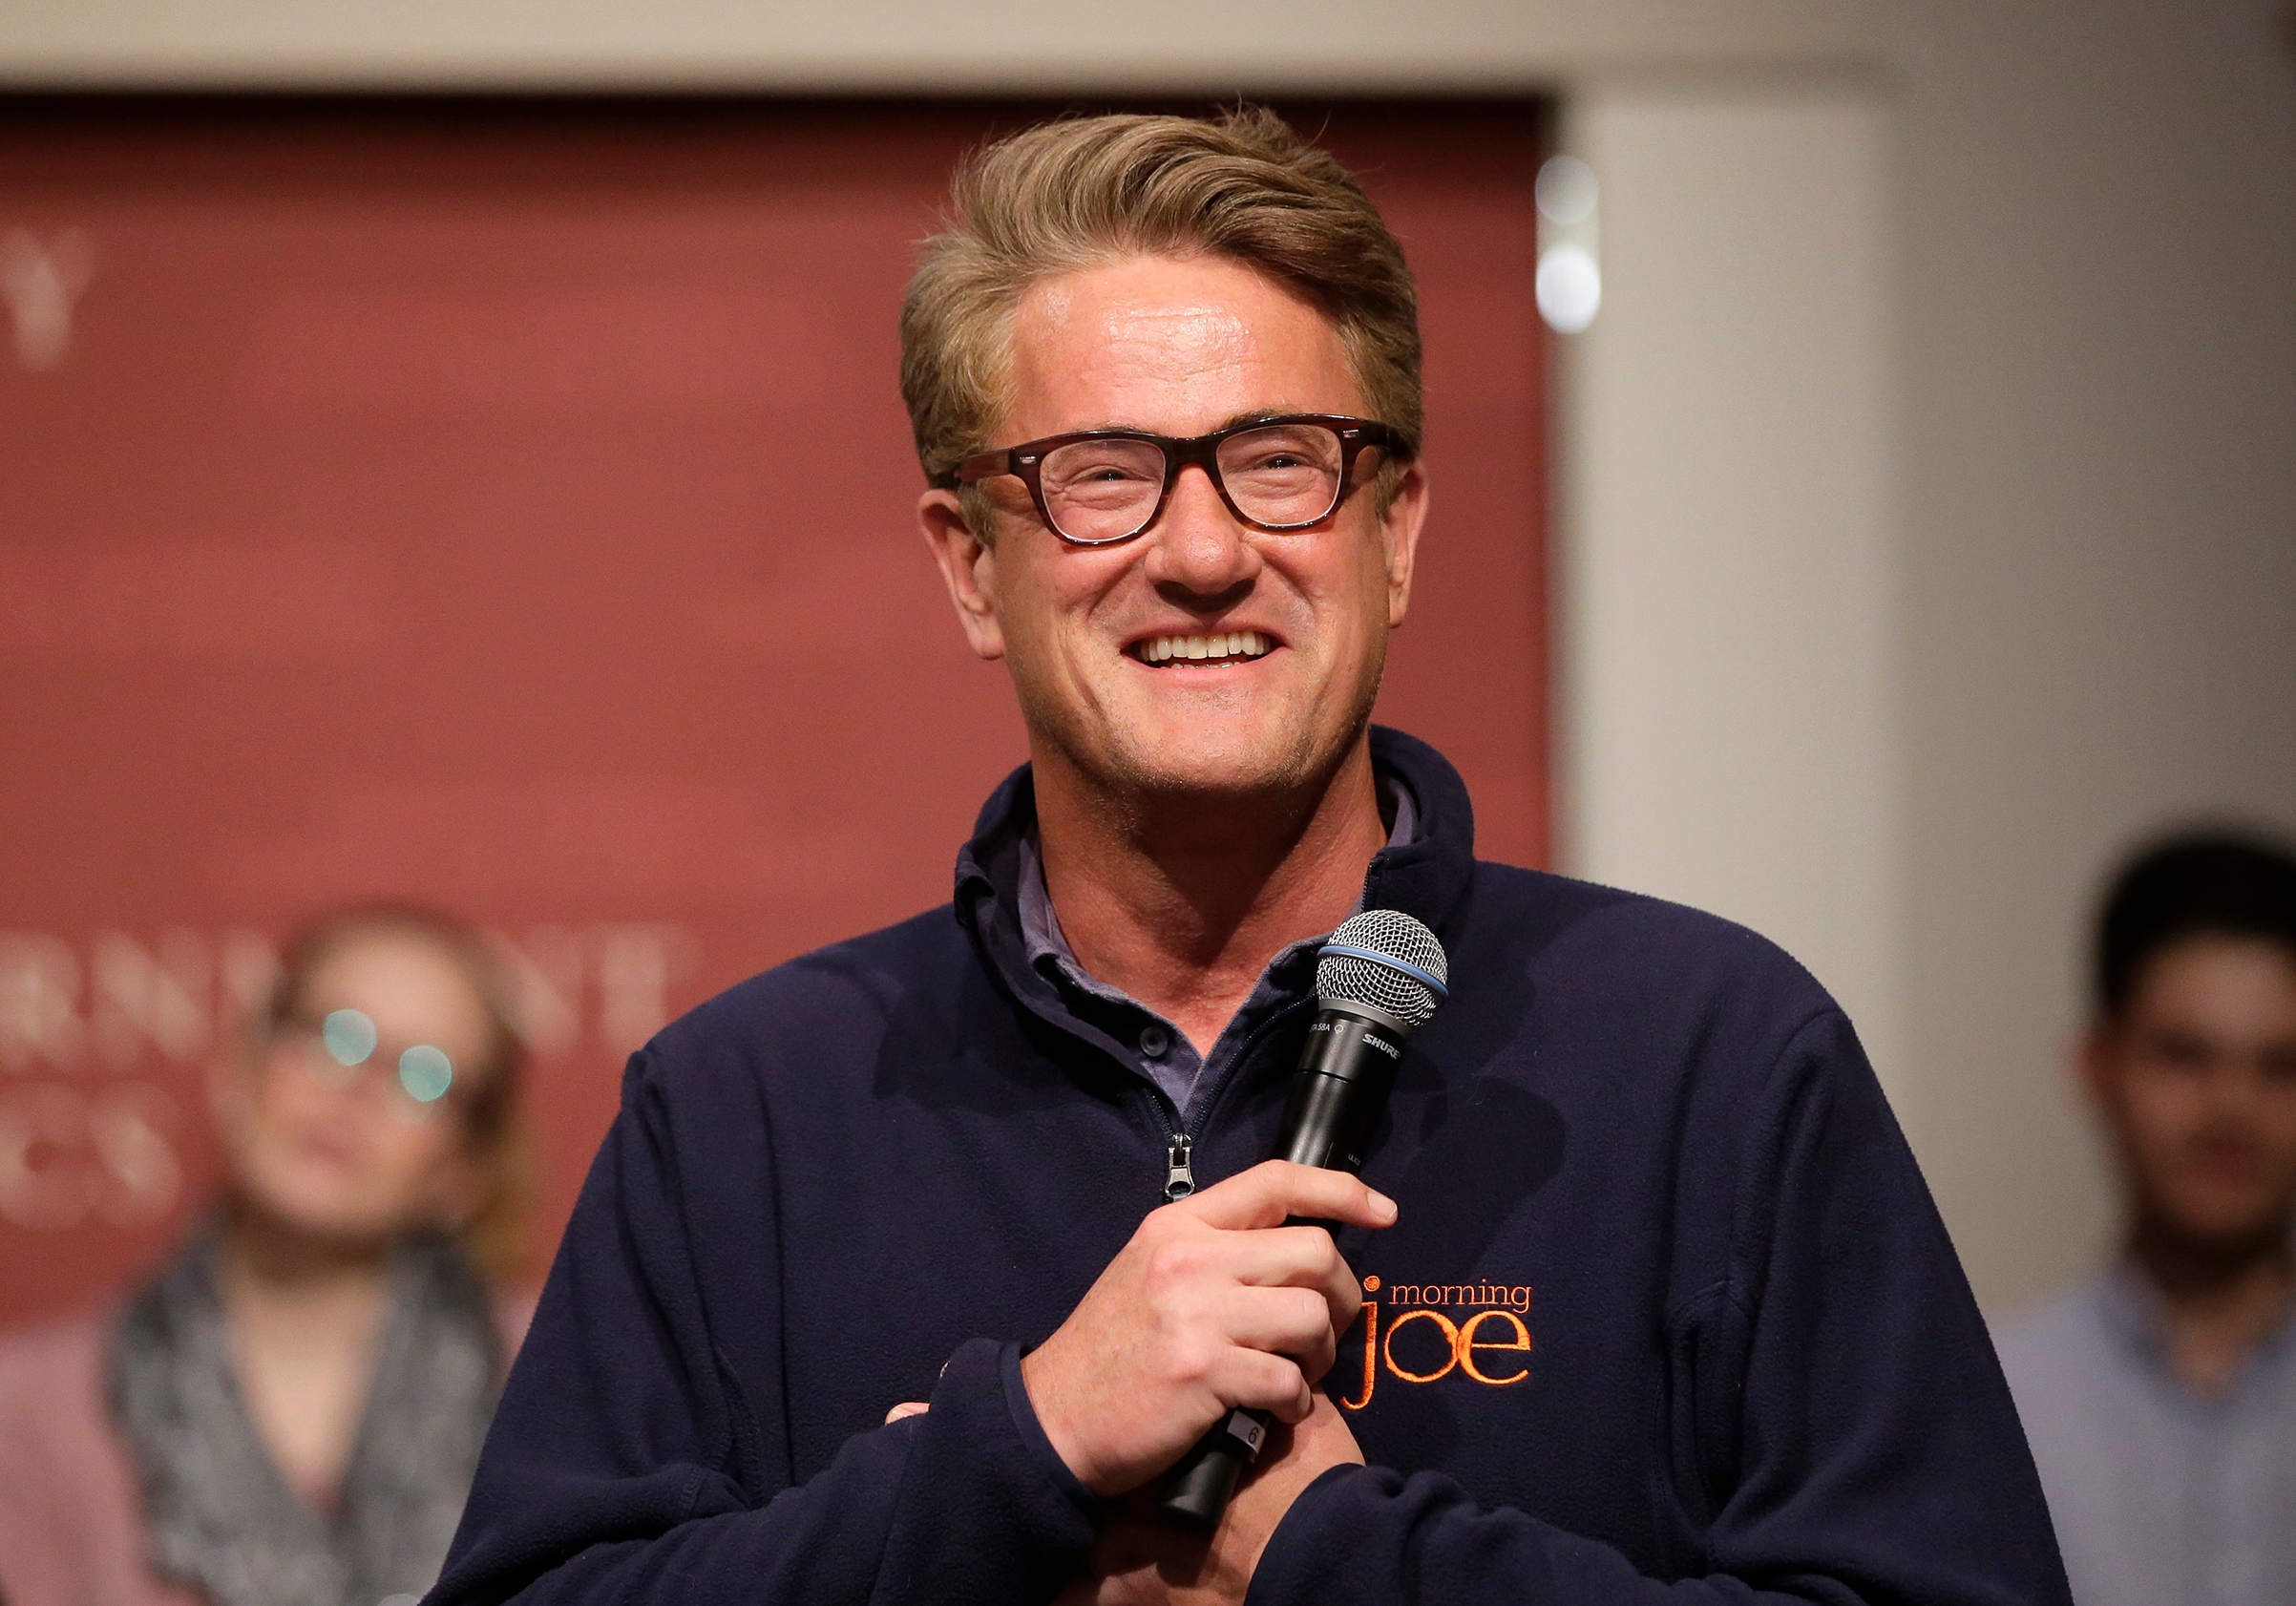 MSNBC television anchor Joe Scarborough, co-hosts of the show "Morning Joe," takes questions from an audience, at a forum on Oct. 11, 2017. (AP/Shutterstock)